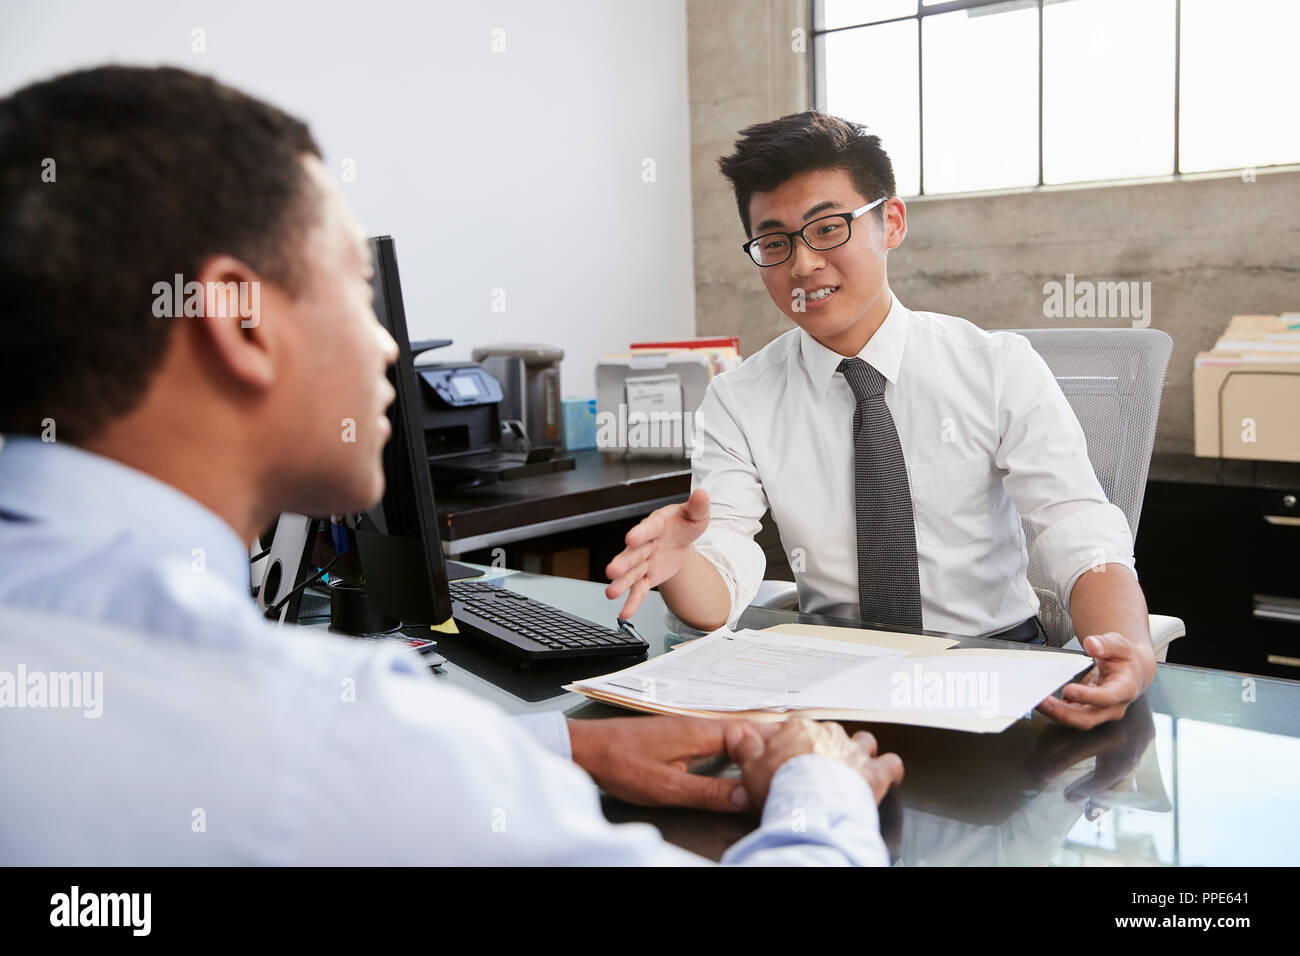 Young Asian professional in meeting with mixed race man Stock Photo